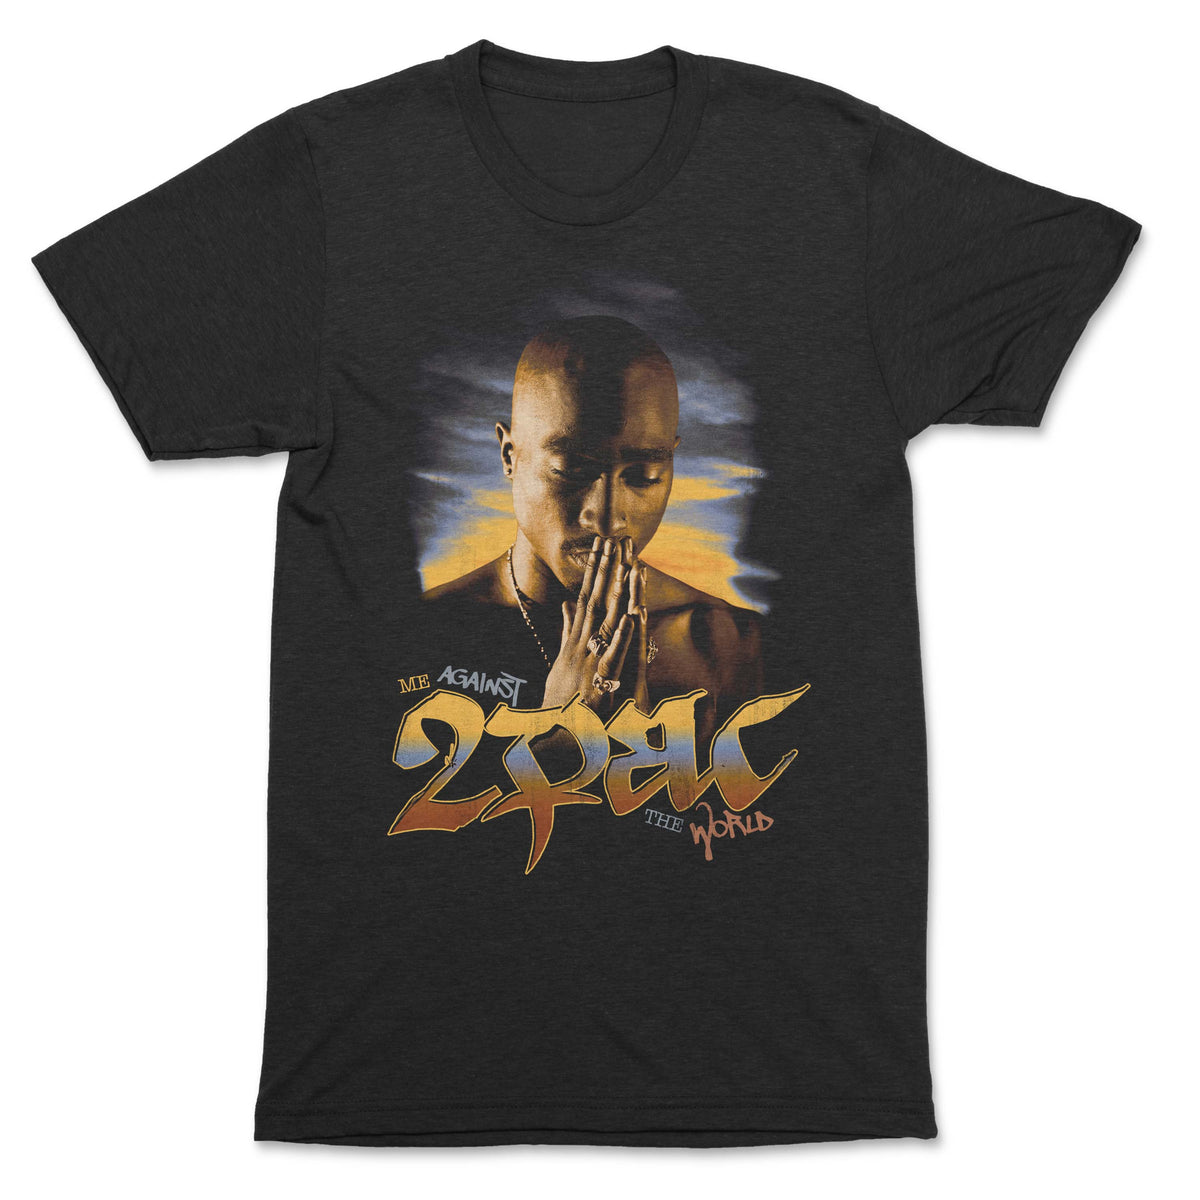 Tupac - Against the World Premium Black T-shirt - OnlyArtistsOfficial